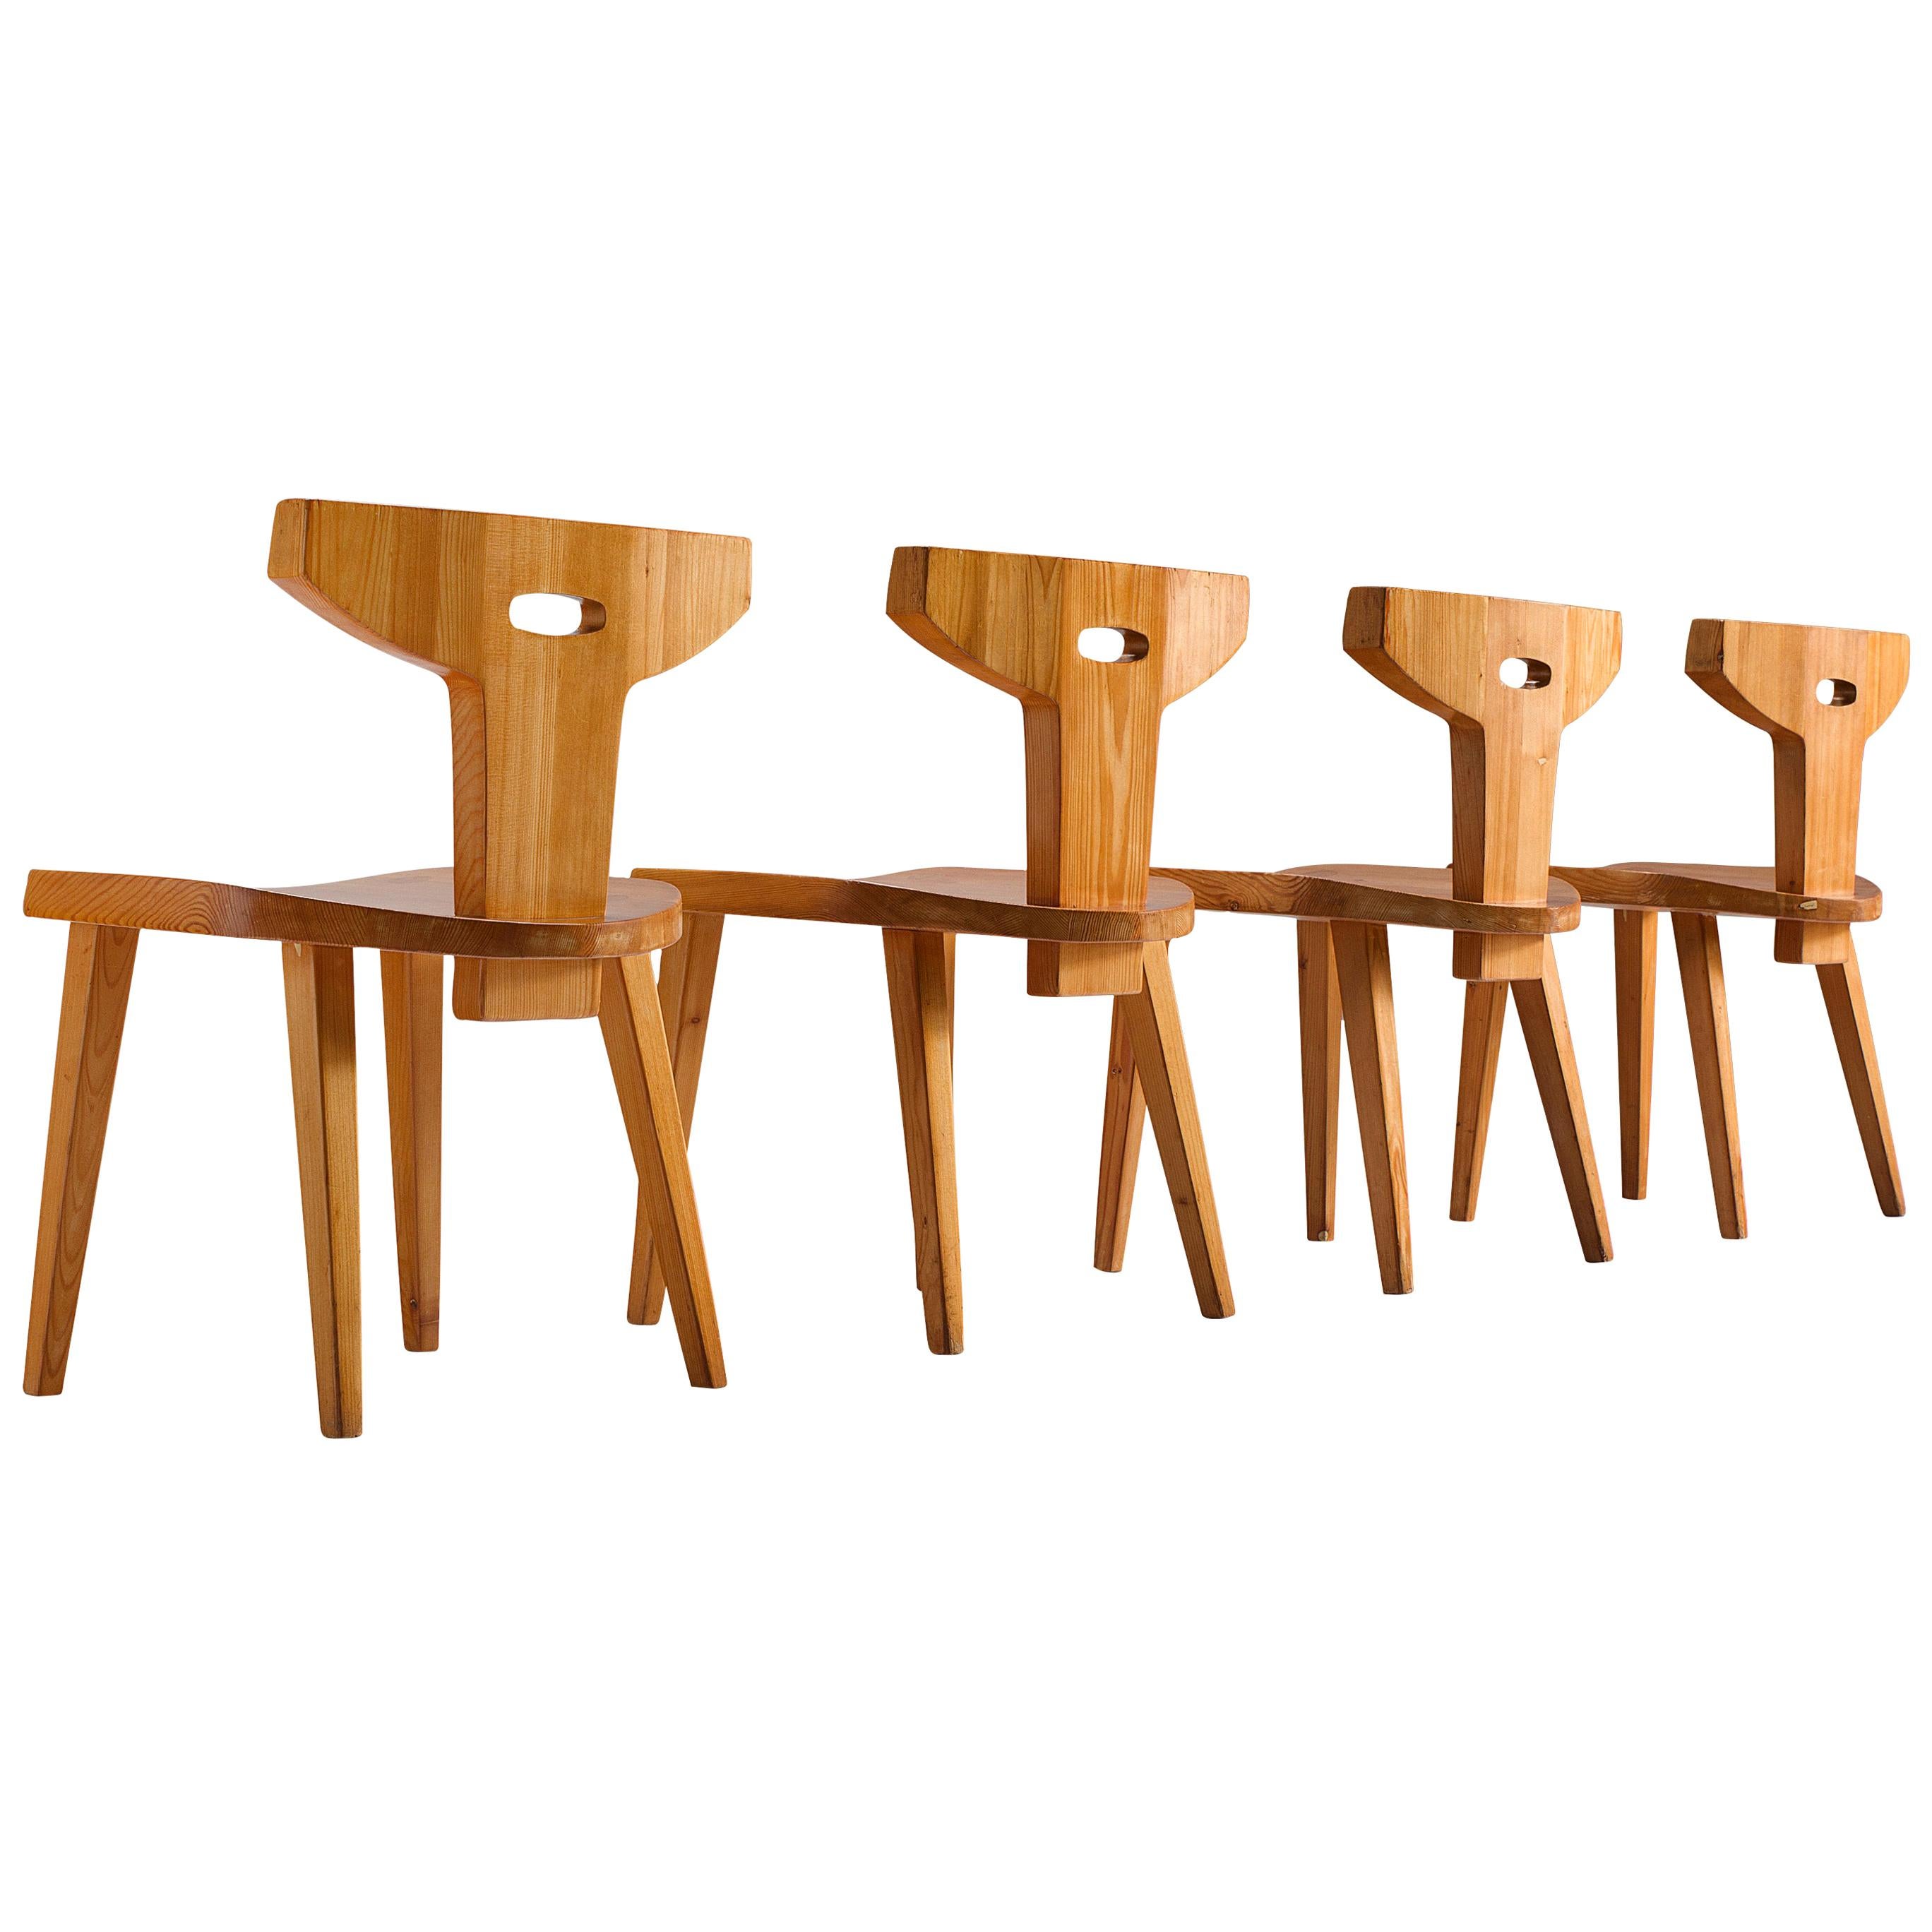 Jacob Kielland-Brandt Set of Four Dining Chairs in Solid Pine